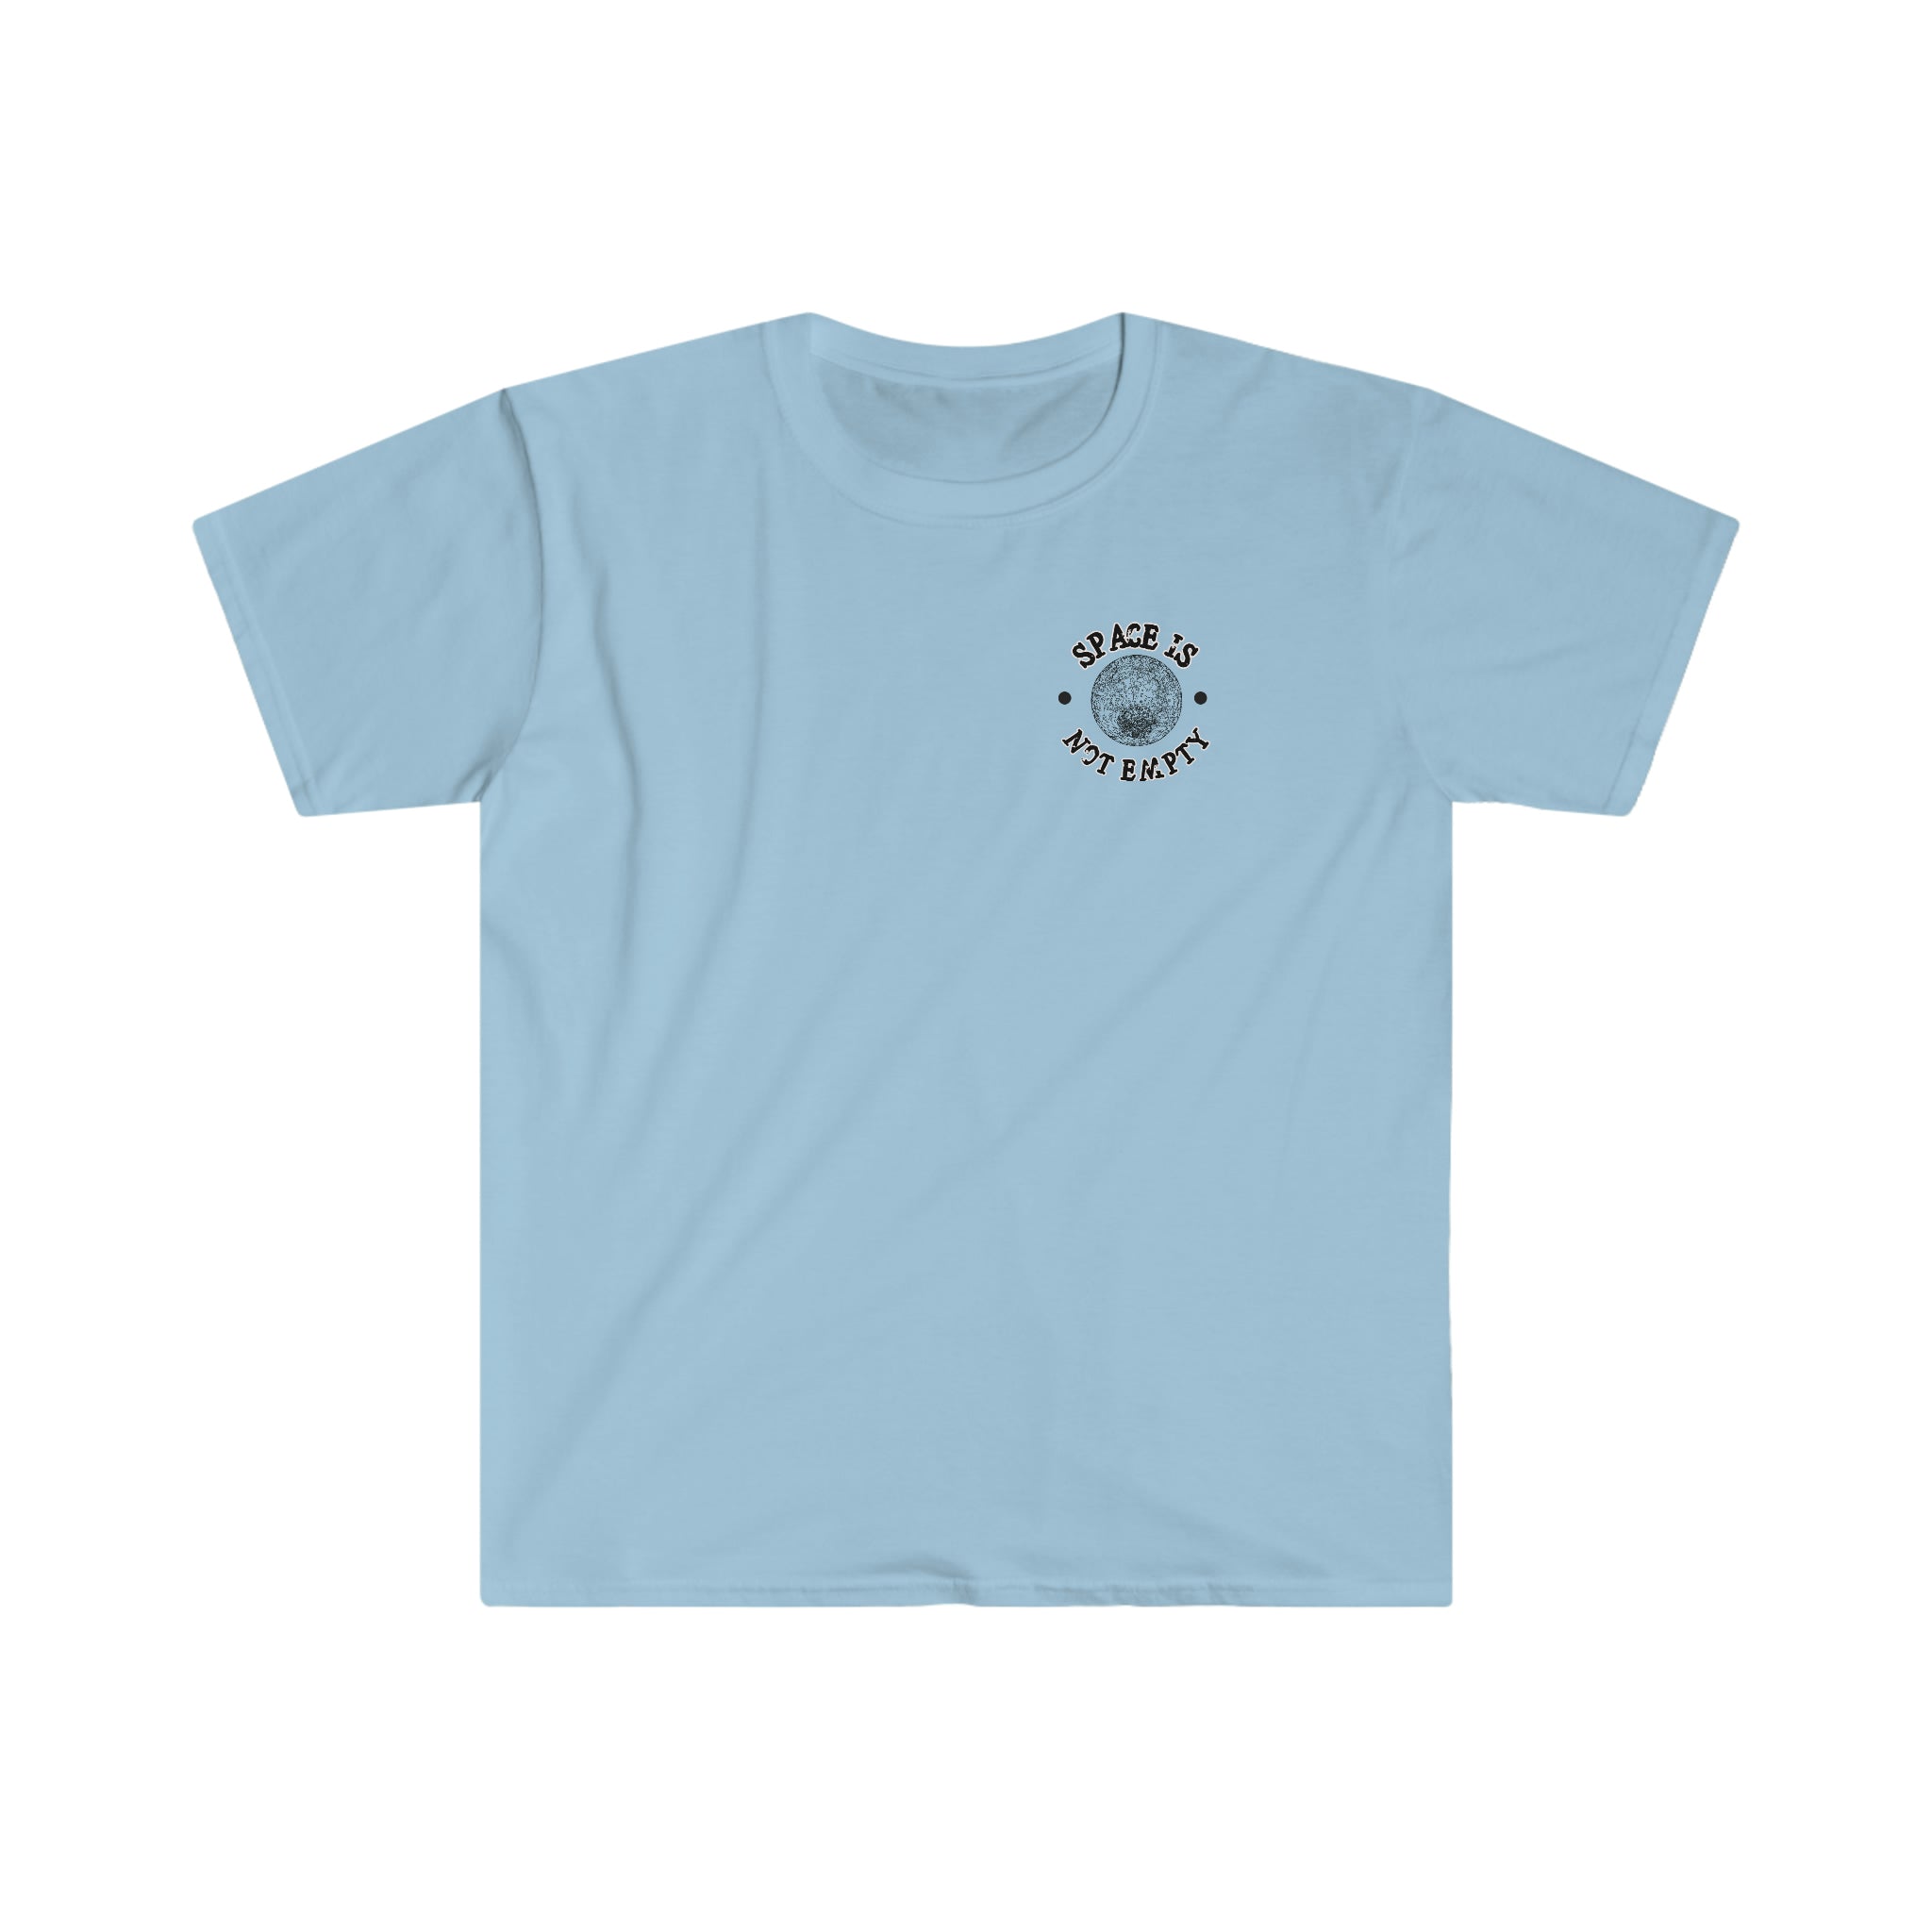 A light blue Space is my goal T-Shirt with a circle on it, perfect for adding style to your wardrobe.